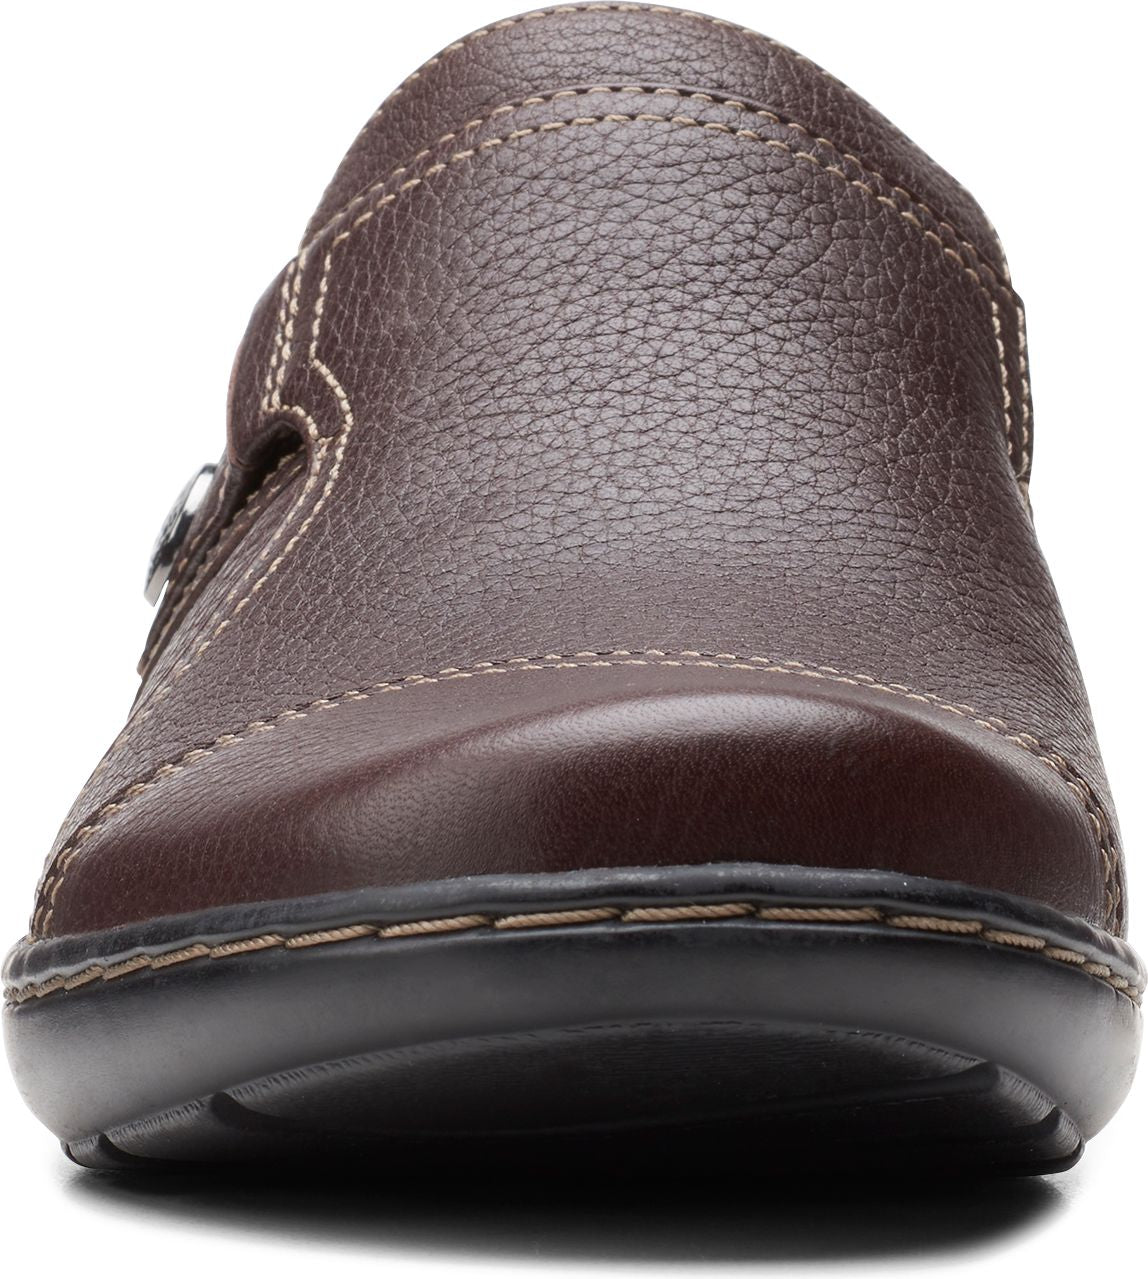 Clarks Shoes Cora Poppy Brown